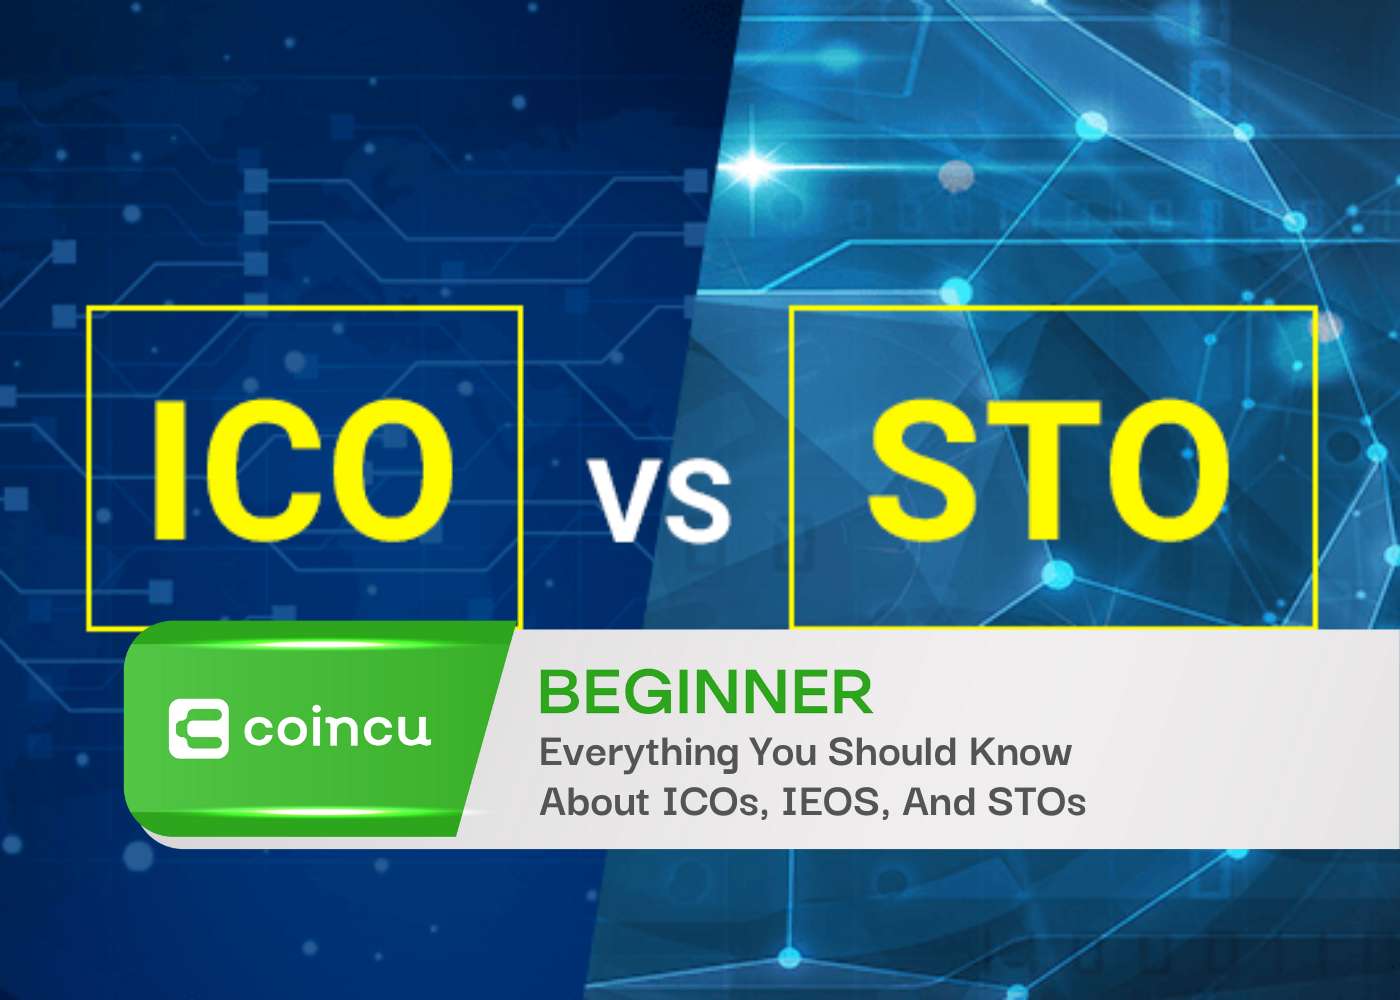 About ICOs IEOS And STOs